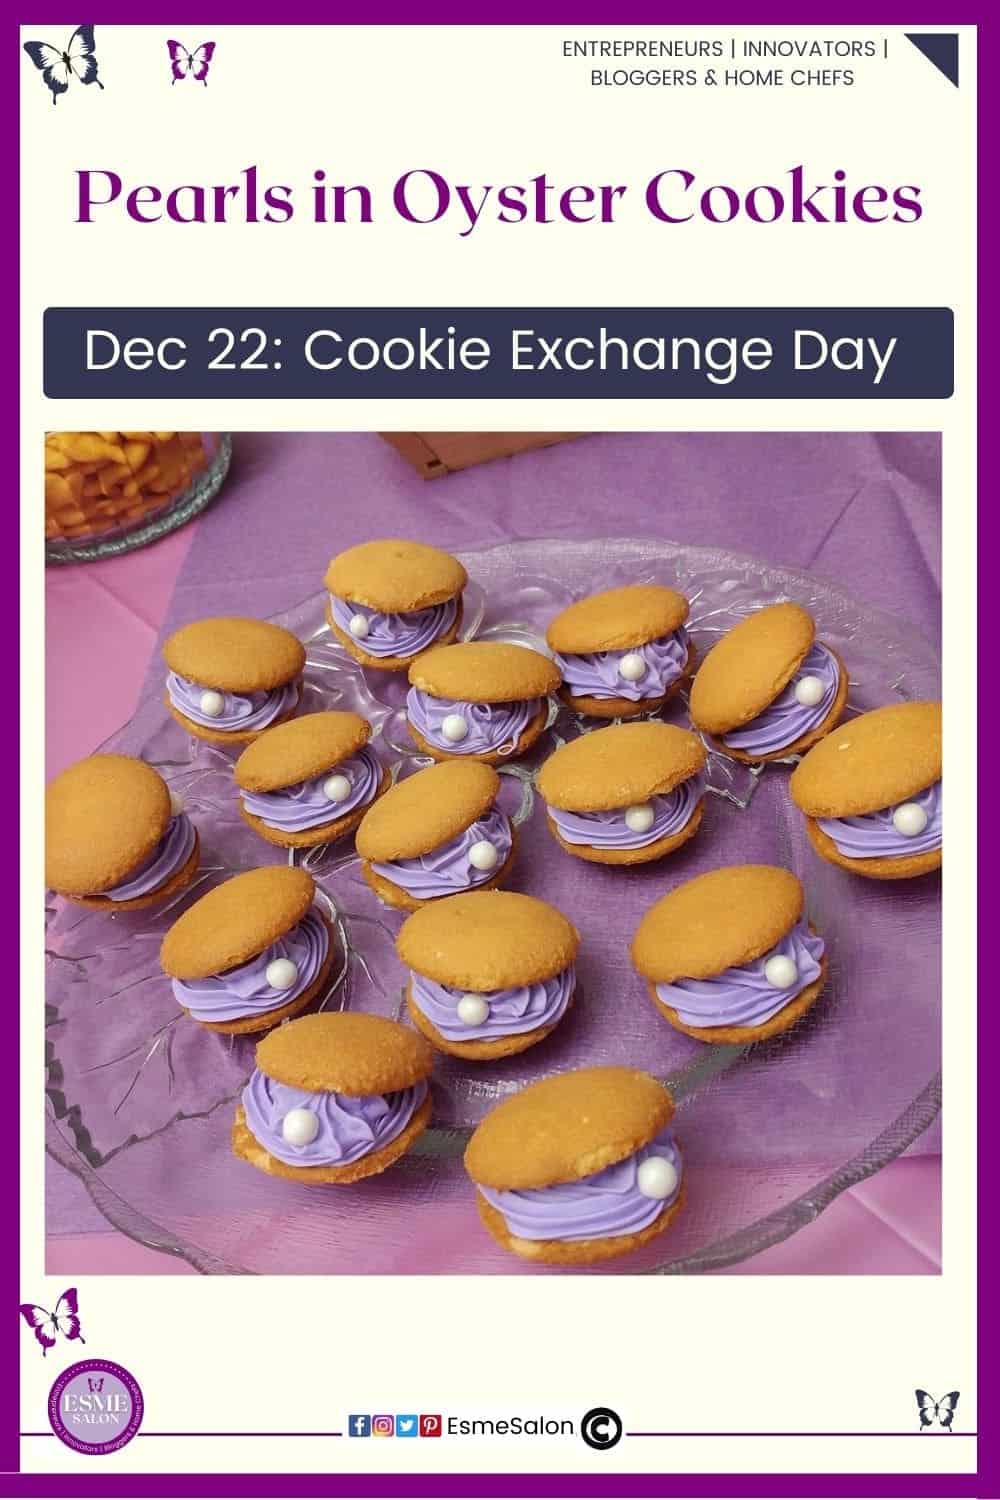 an image of Pearls in Oyster Cookies with purple icing piped between two cookies and a candy resembling a pearl